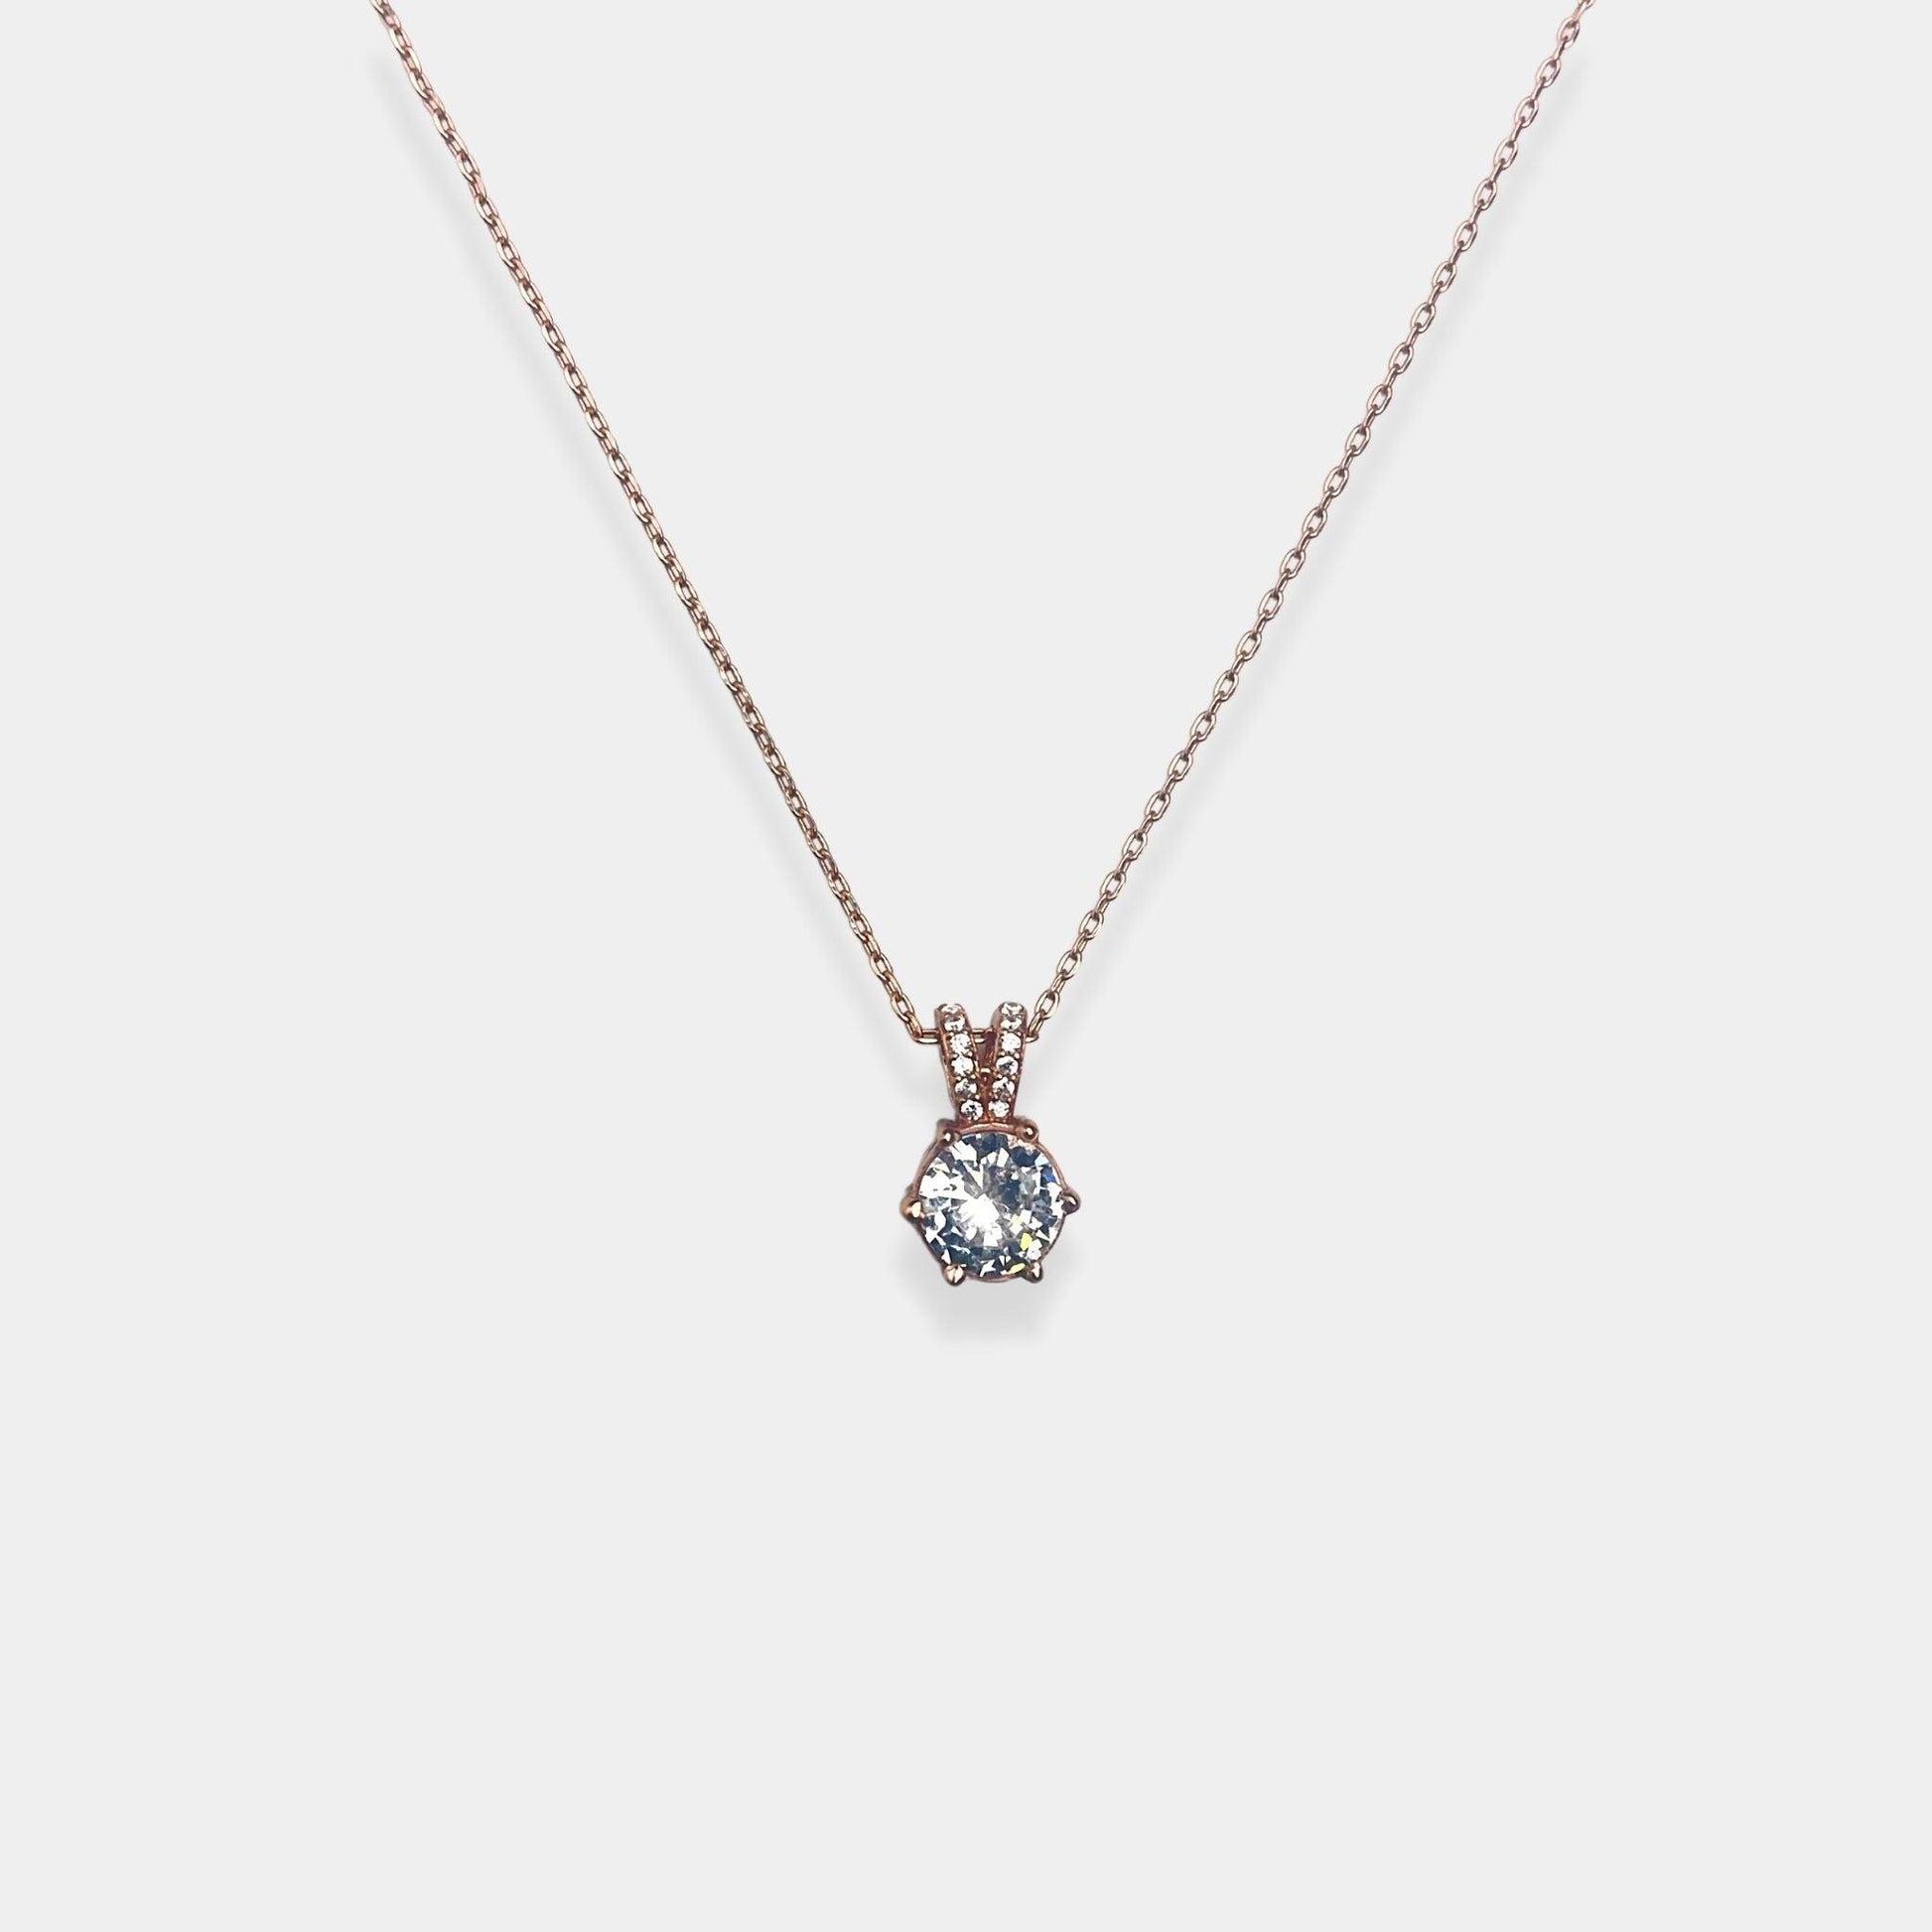 Elevate your style with our exquisite sterling silver necklace featuring a gracefully hanging sparkling silver pendant.